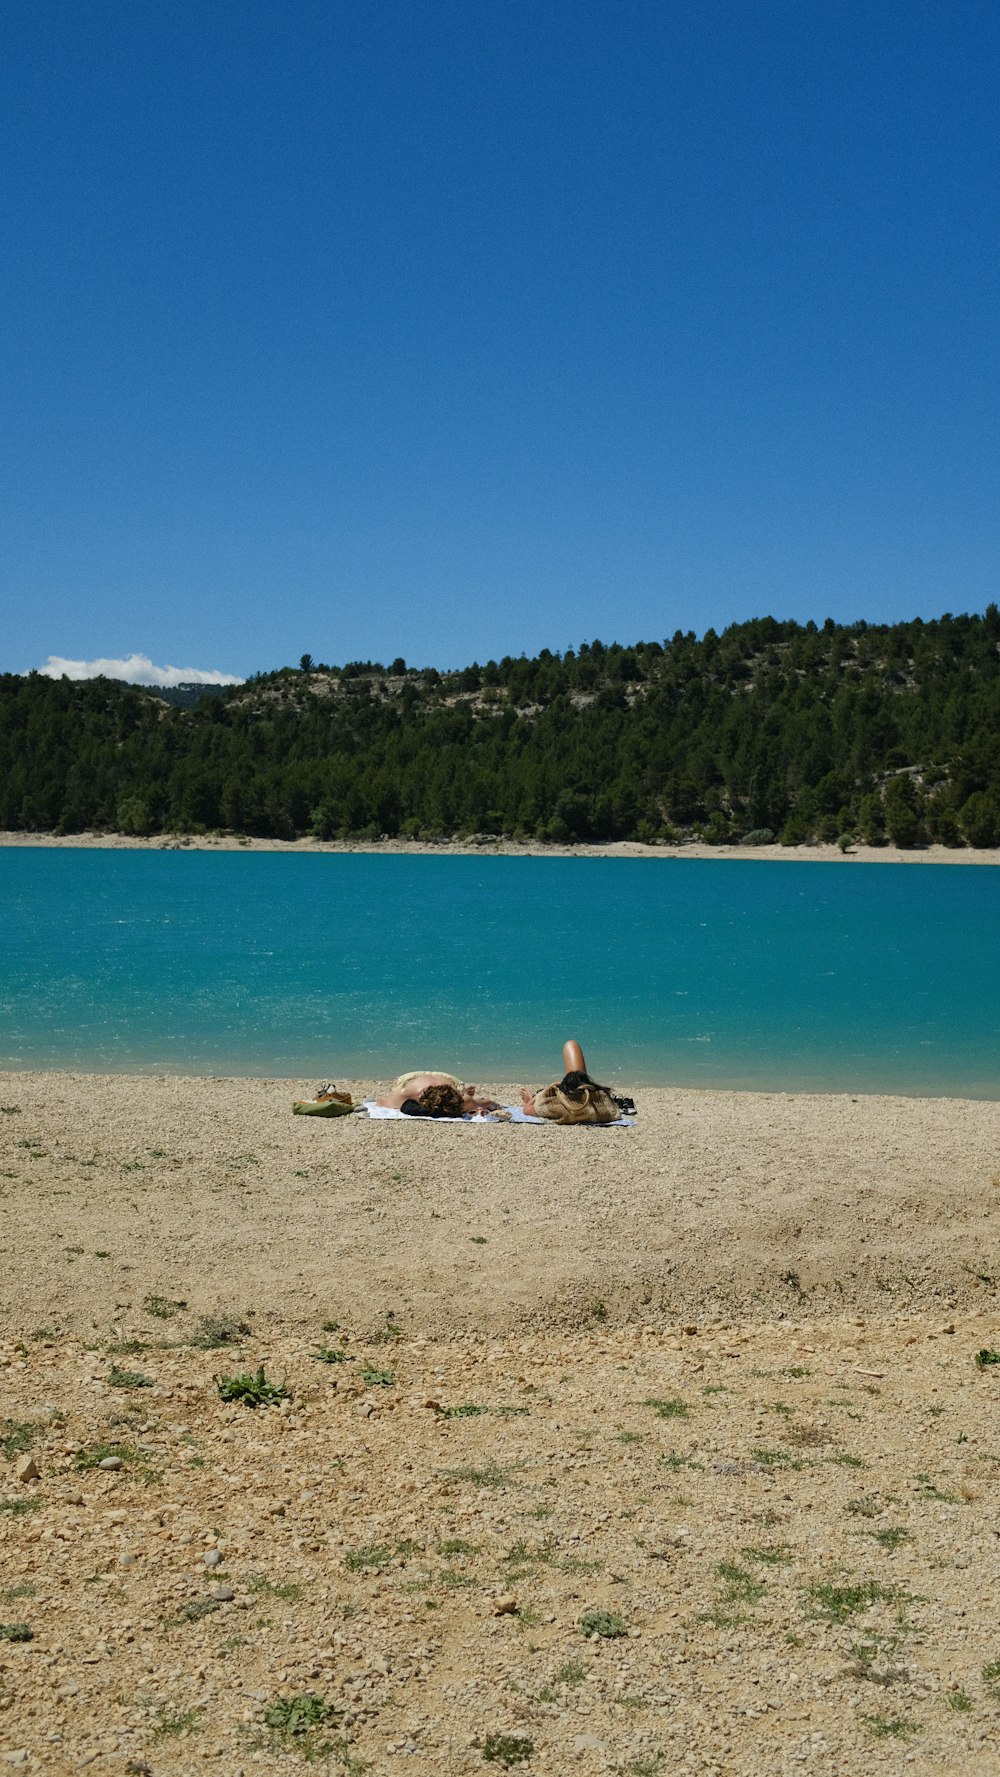 a couple of people lying on a beach by a body of water